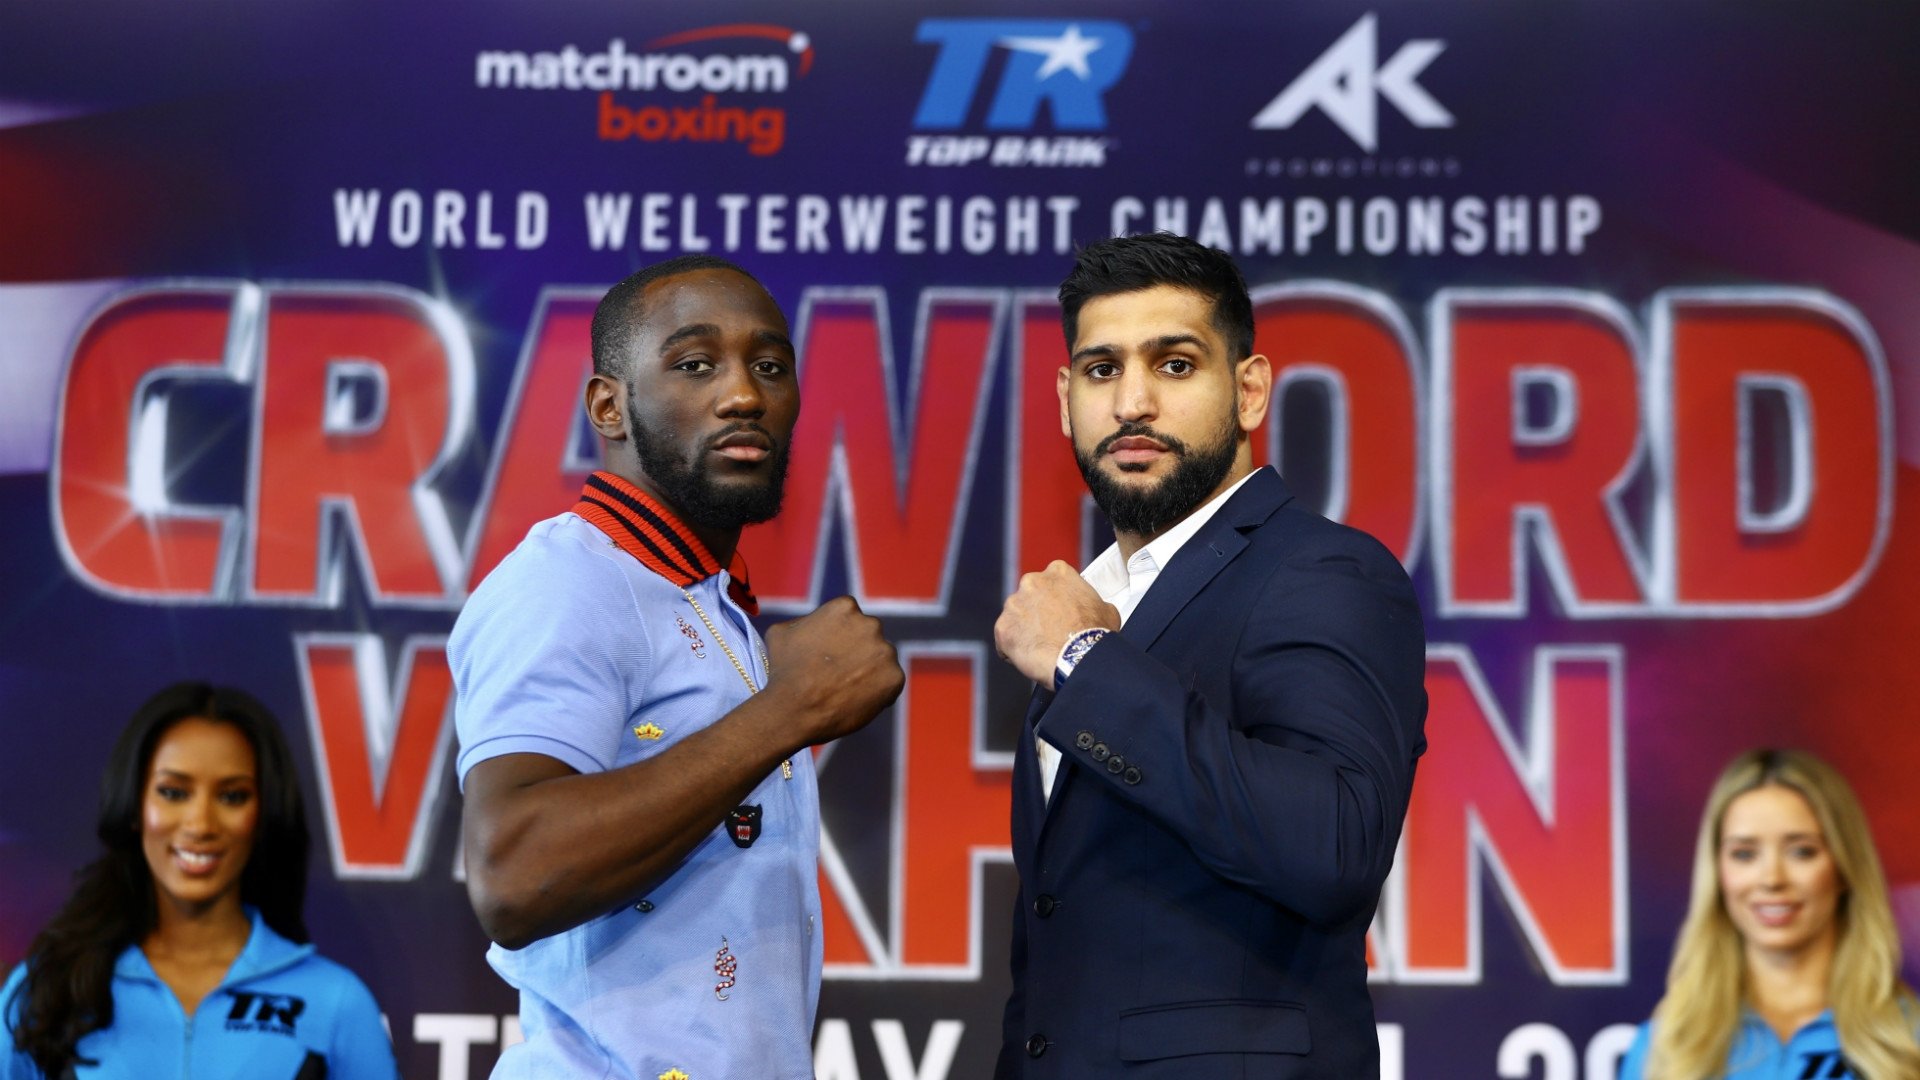 The matchup between Terence Crawford and Amir Khan is never perfect, but it is definitely fun